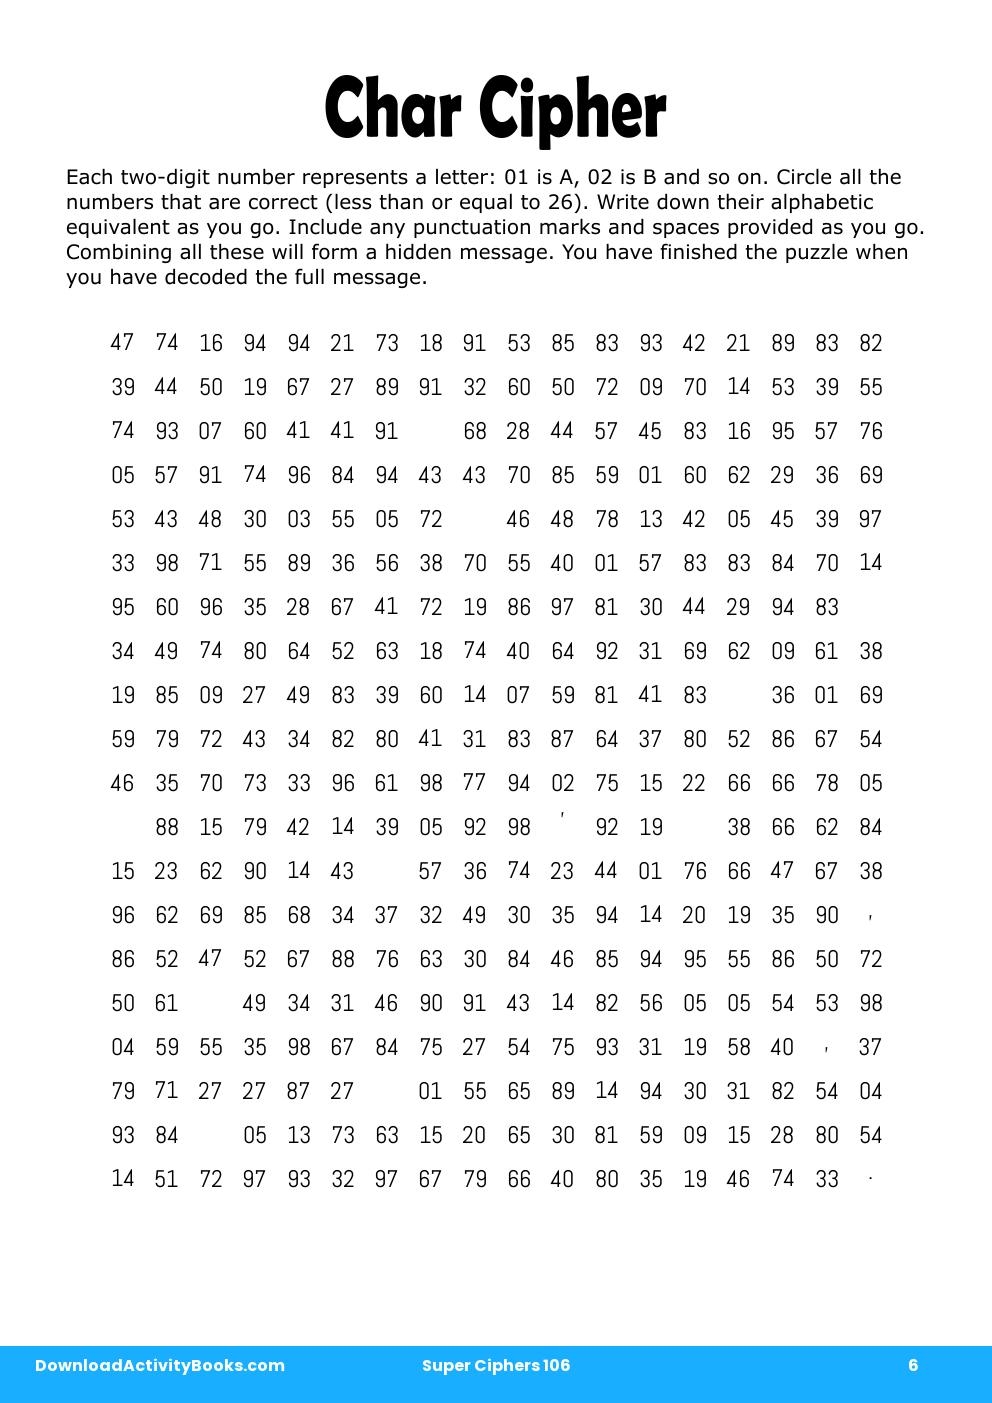 Char Cipher in Super Ciphers 106